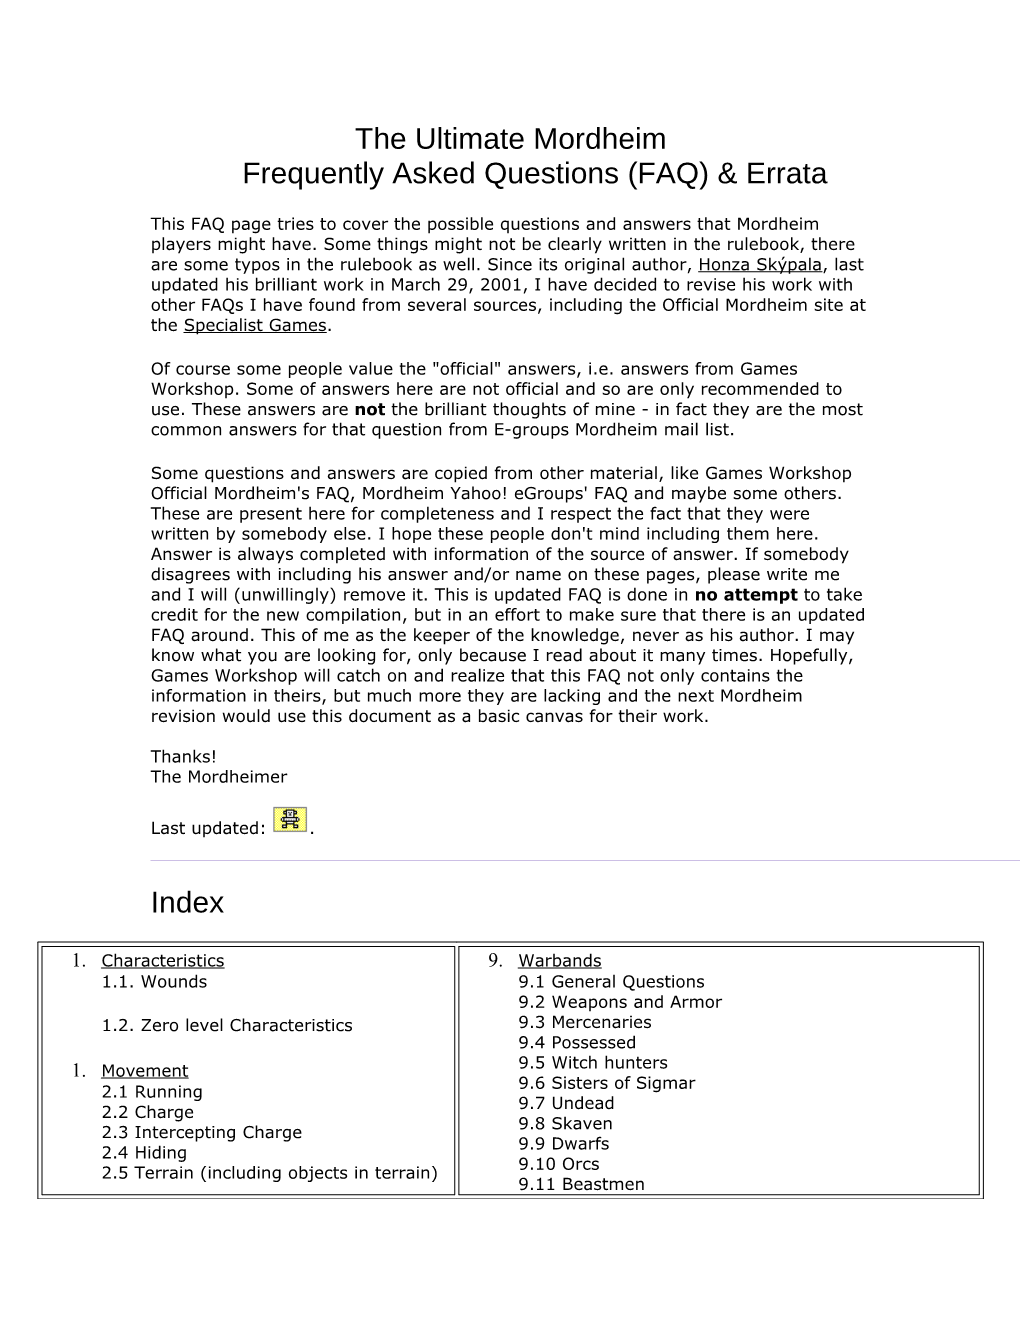 The Ultimate Mordheim Frequently Asked Questions (FAQ) & Errata